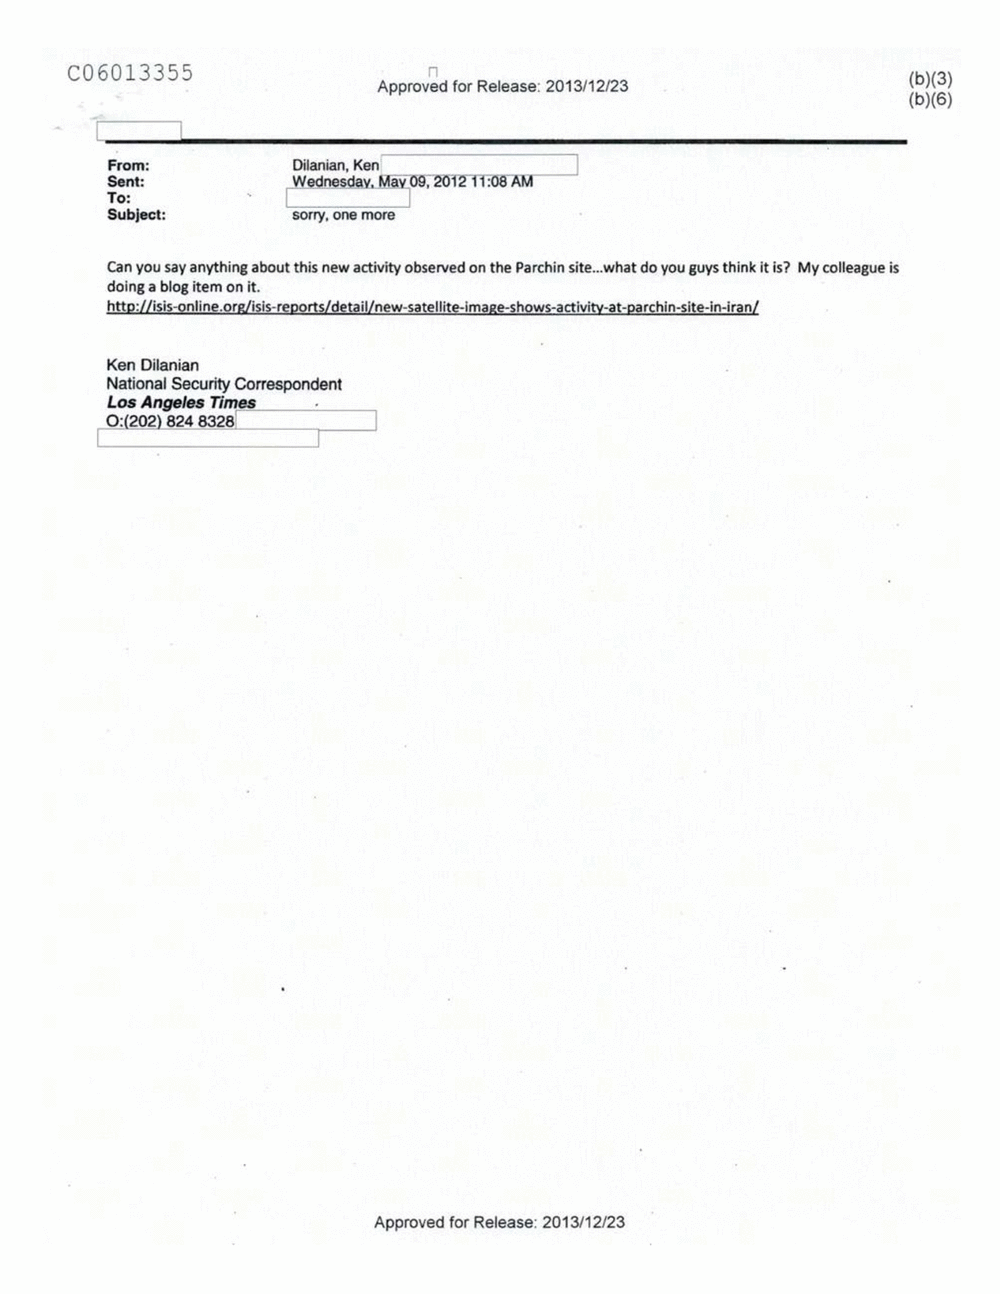 Page 274 from Email Correspondence Between Reporters and CIA Flacks